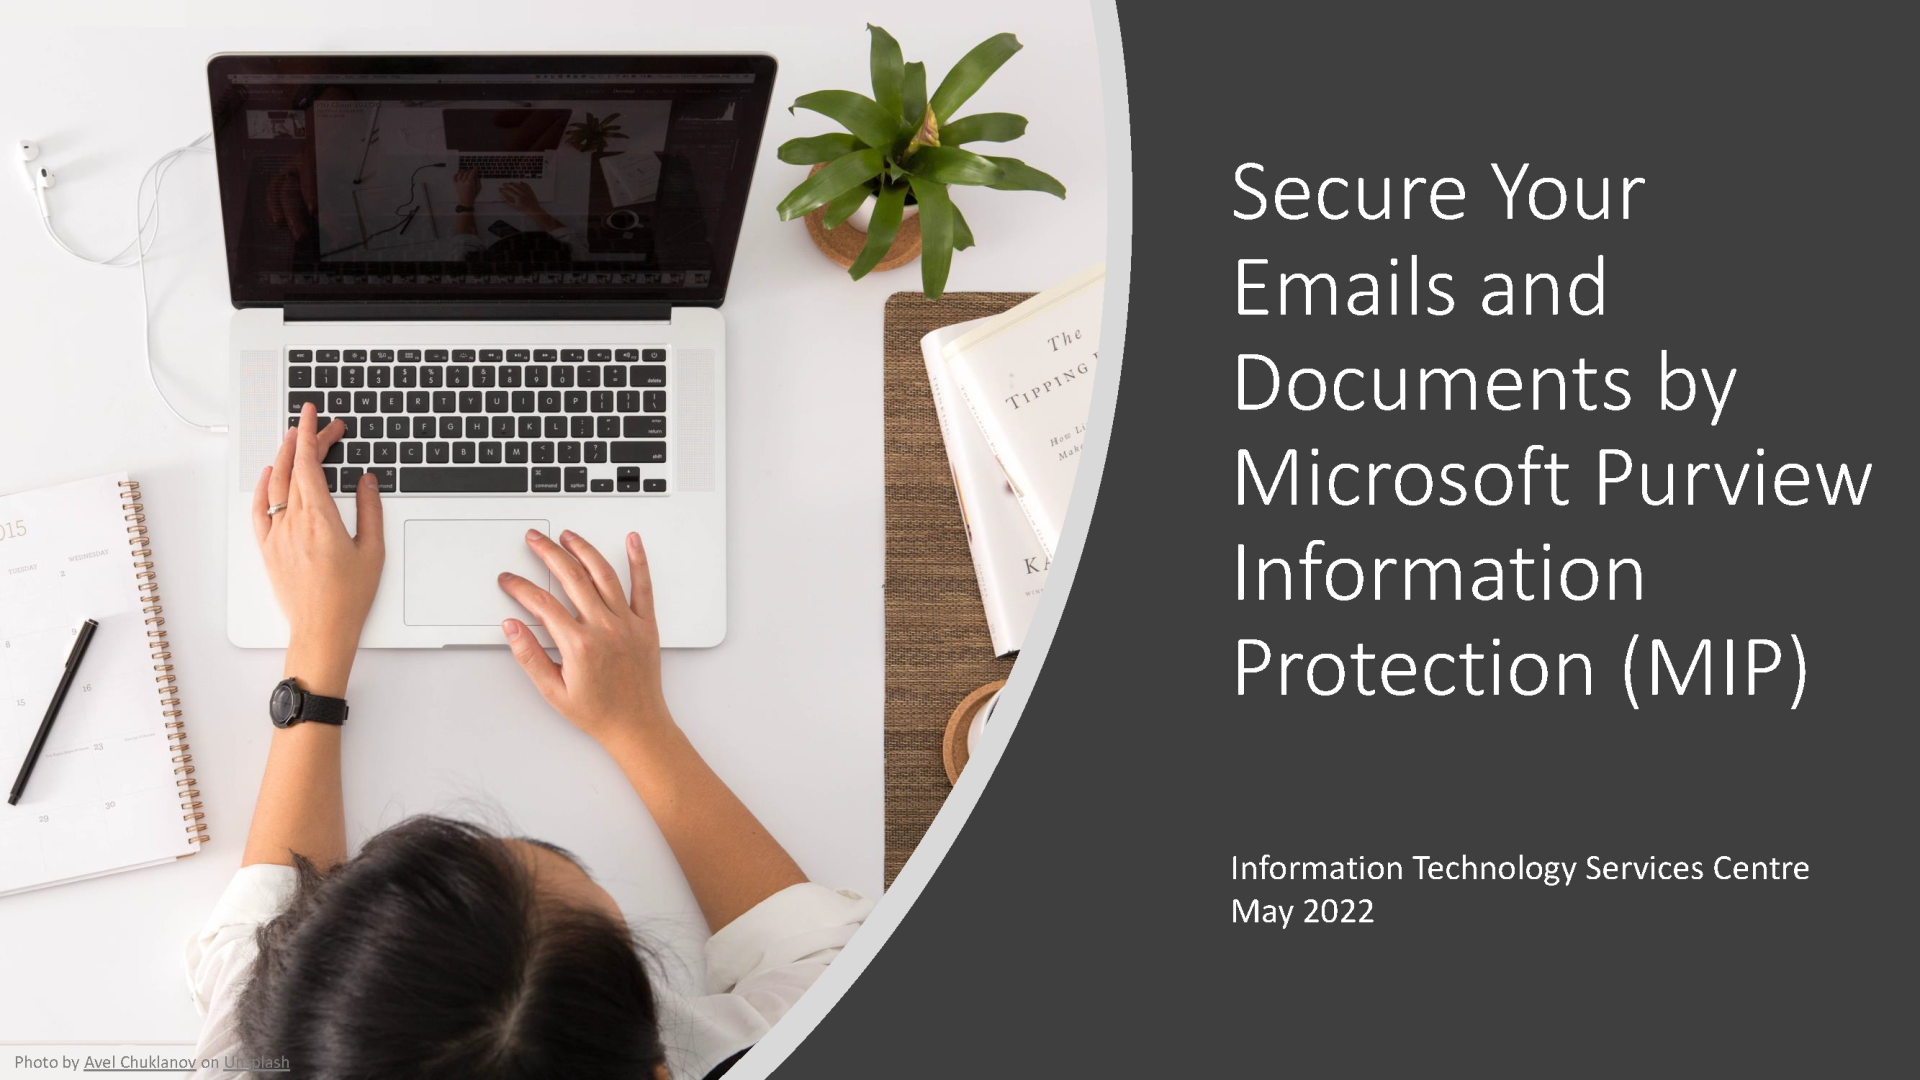 Secure Your Email and Document Protection and Sharing